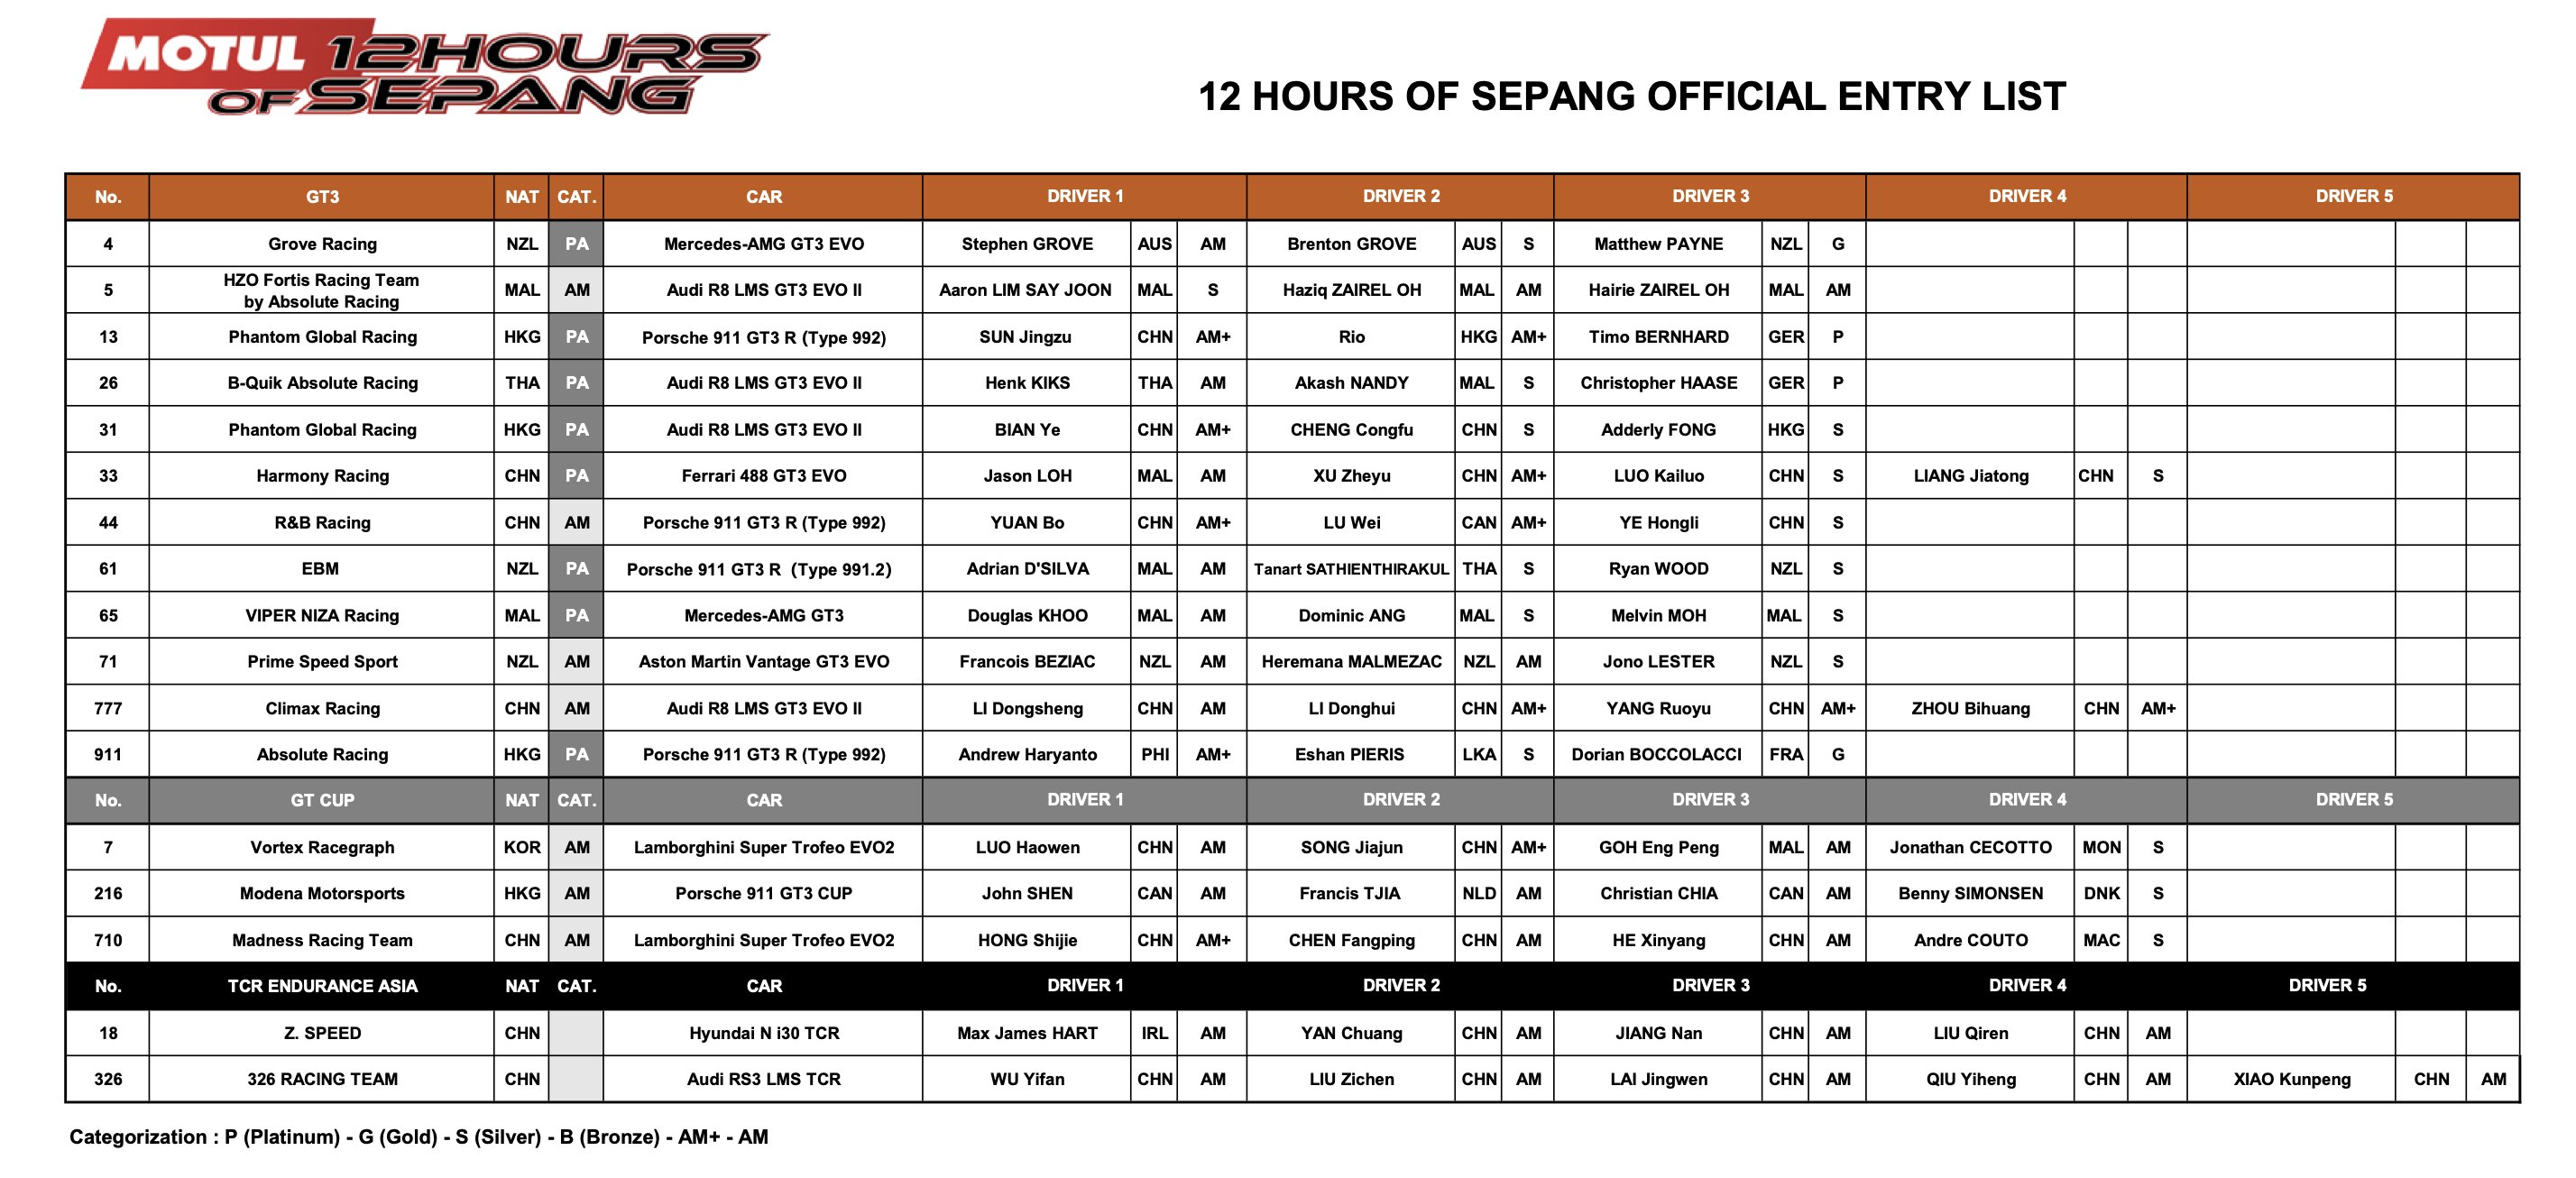 Motul 12 Hours of Sepang on X: Here is our ENTRY LIST: https